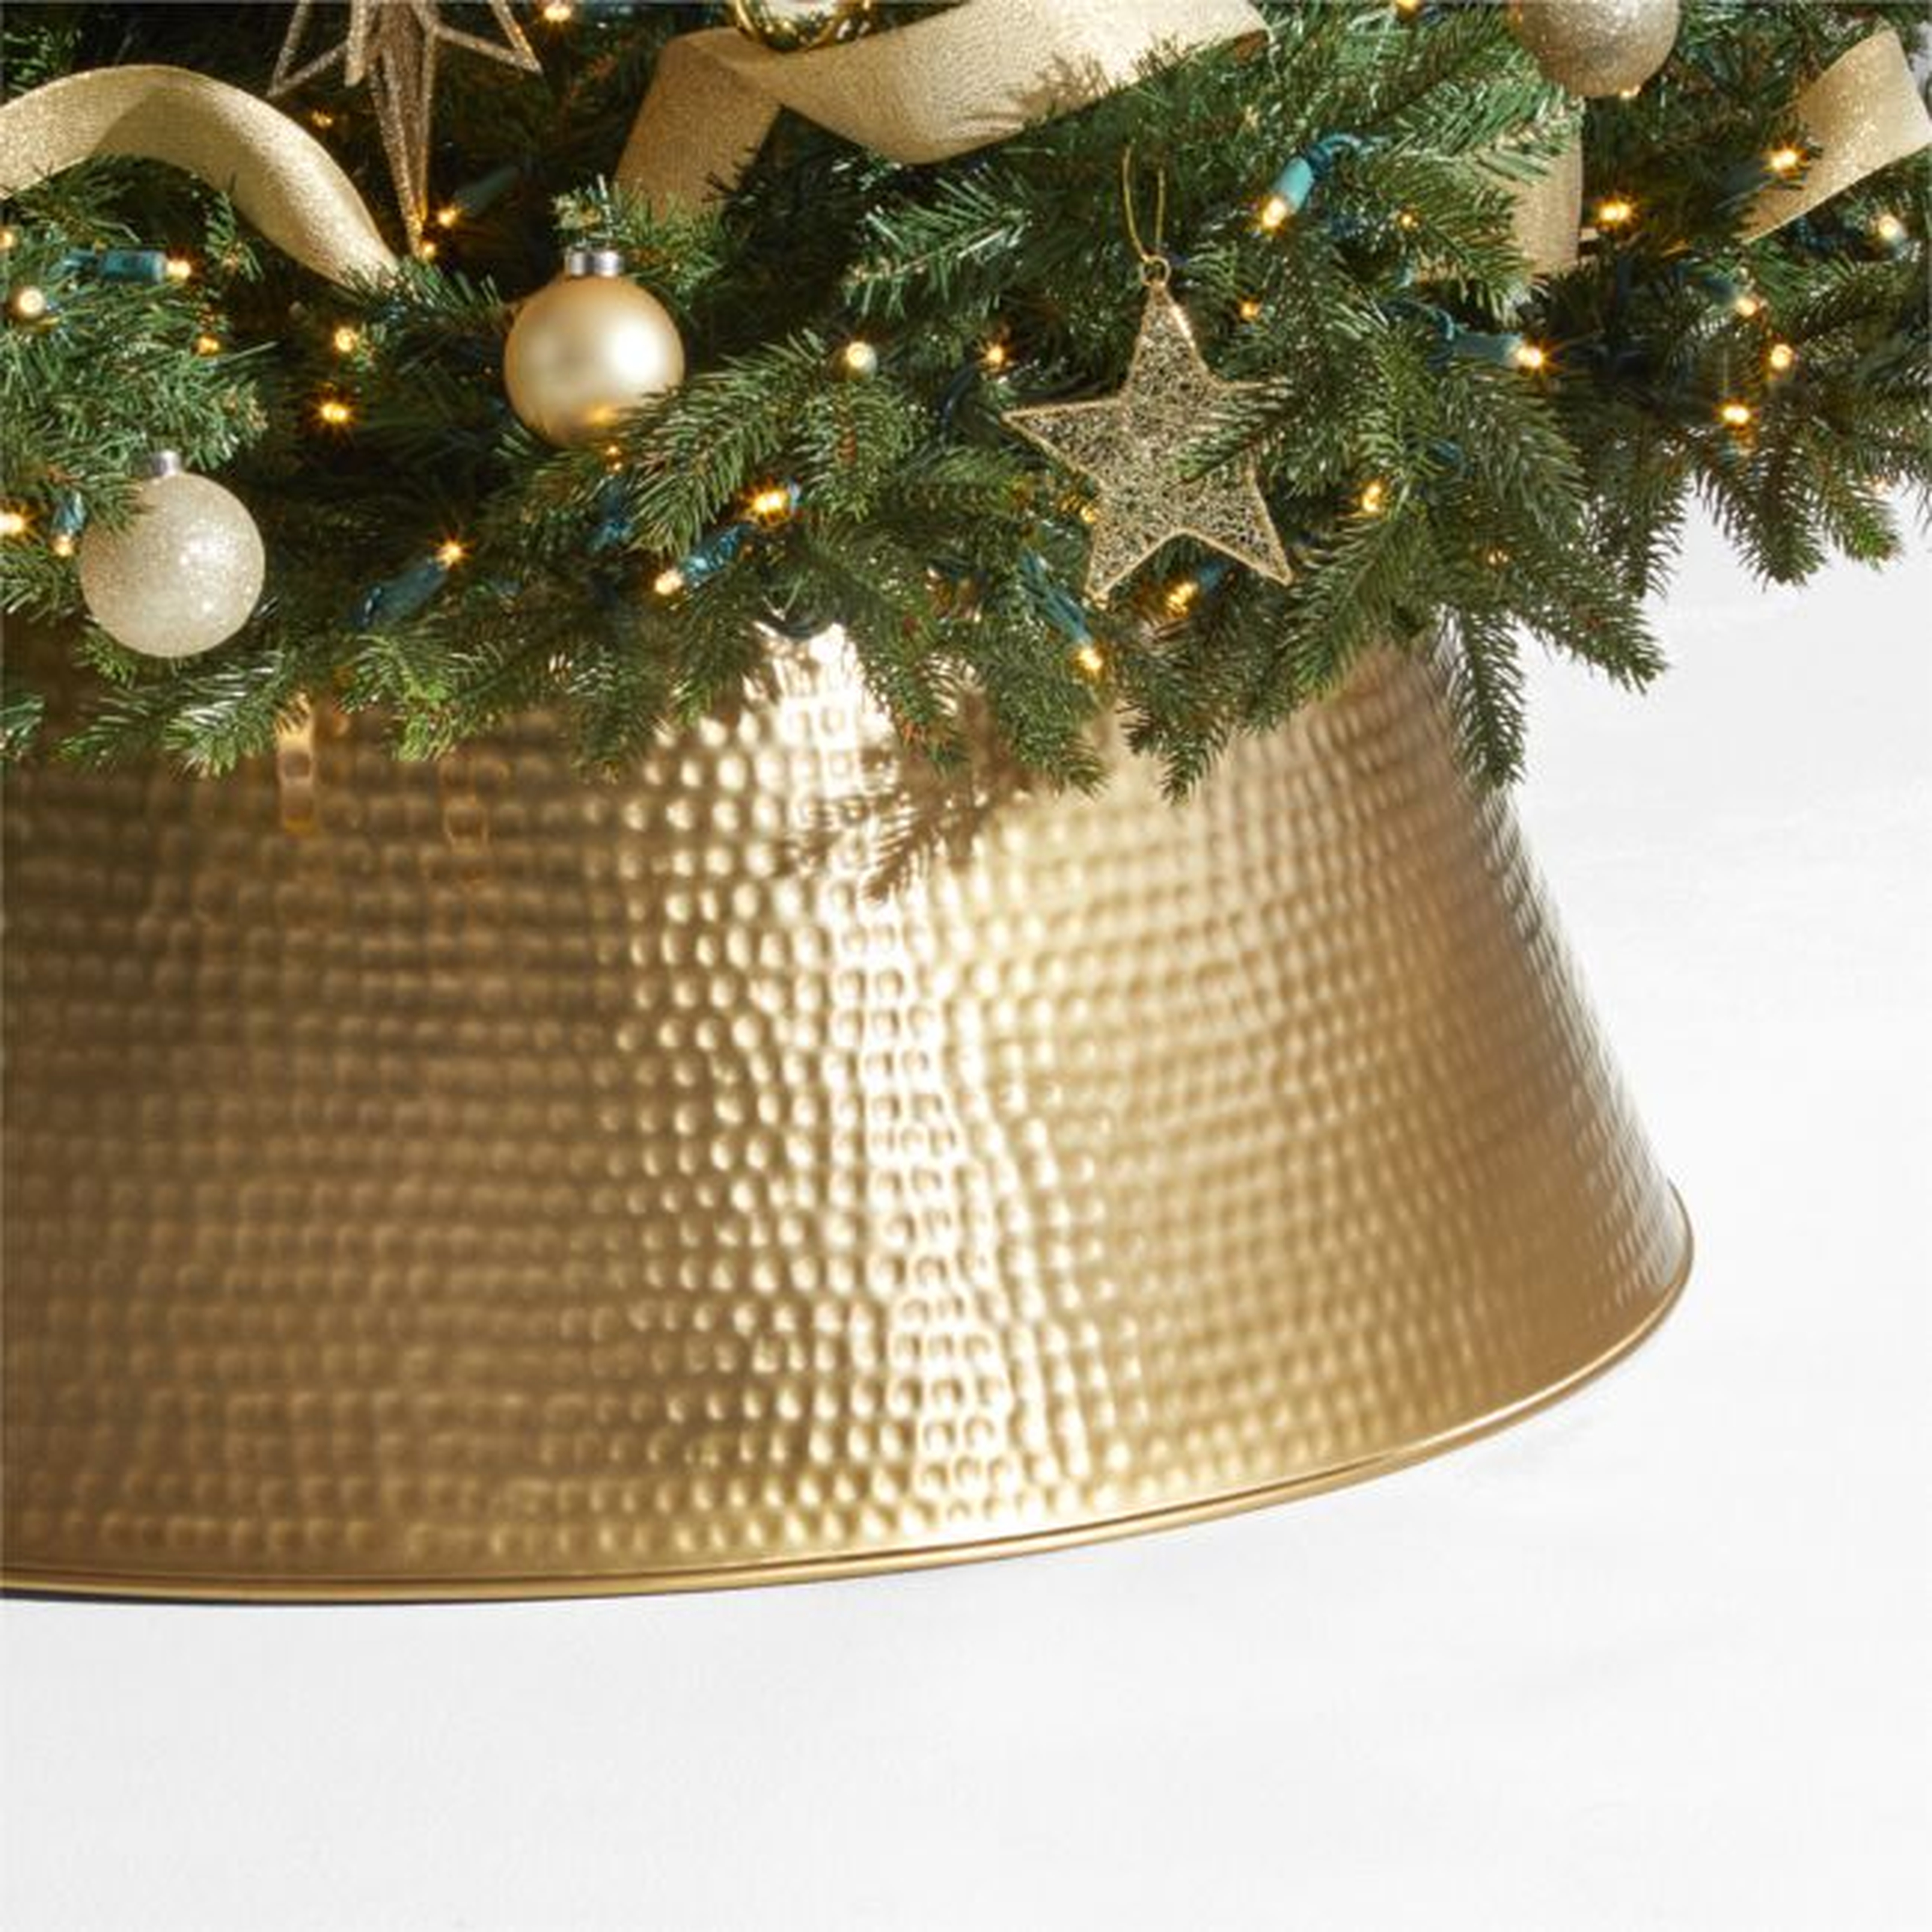 Large Bash Gold Christmas Tree Collar 34" - Crate and Barrel